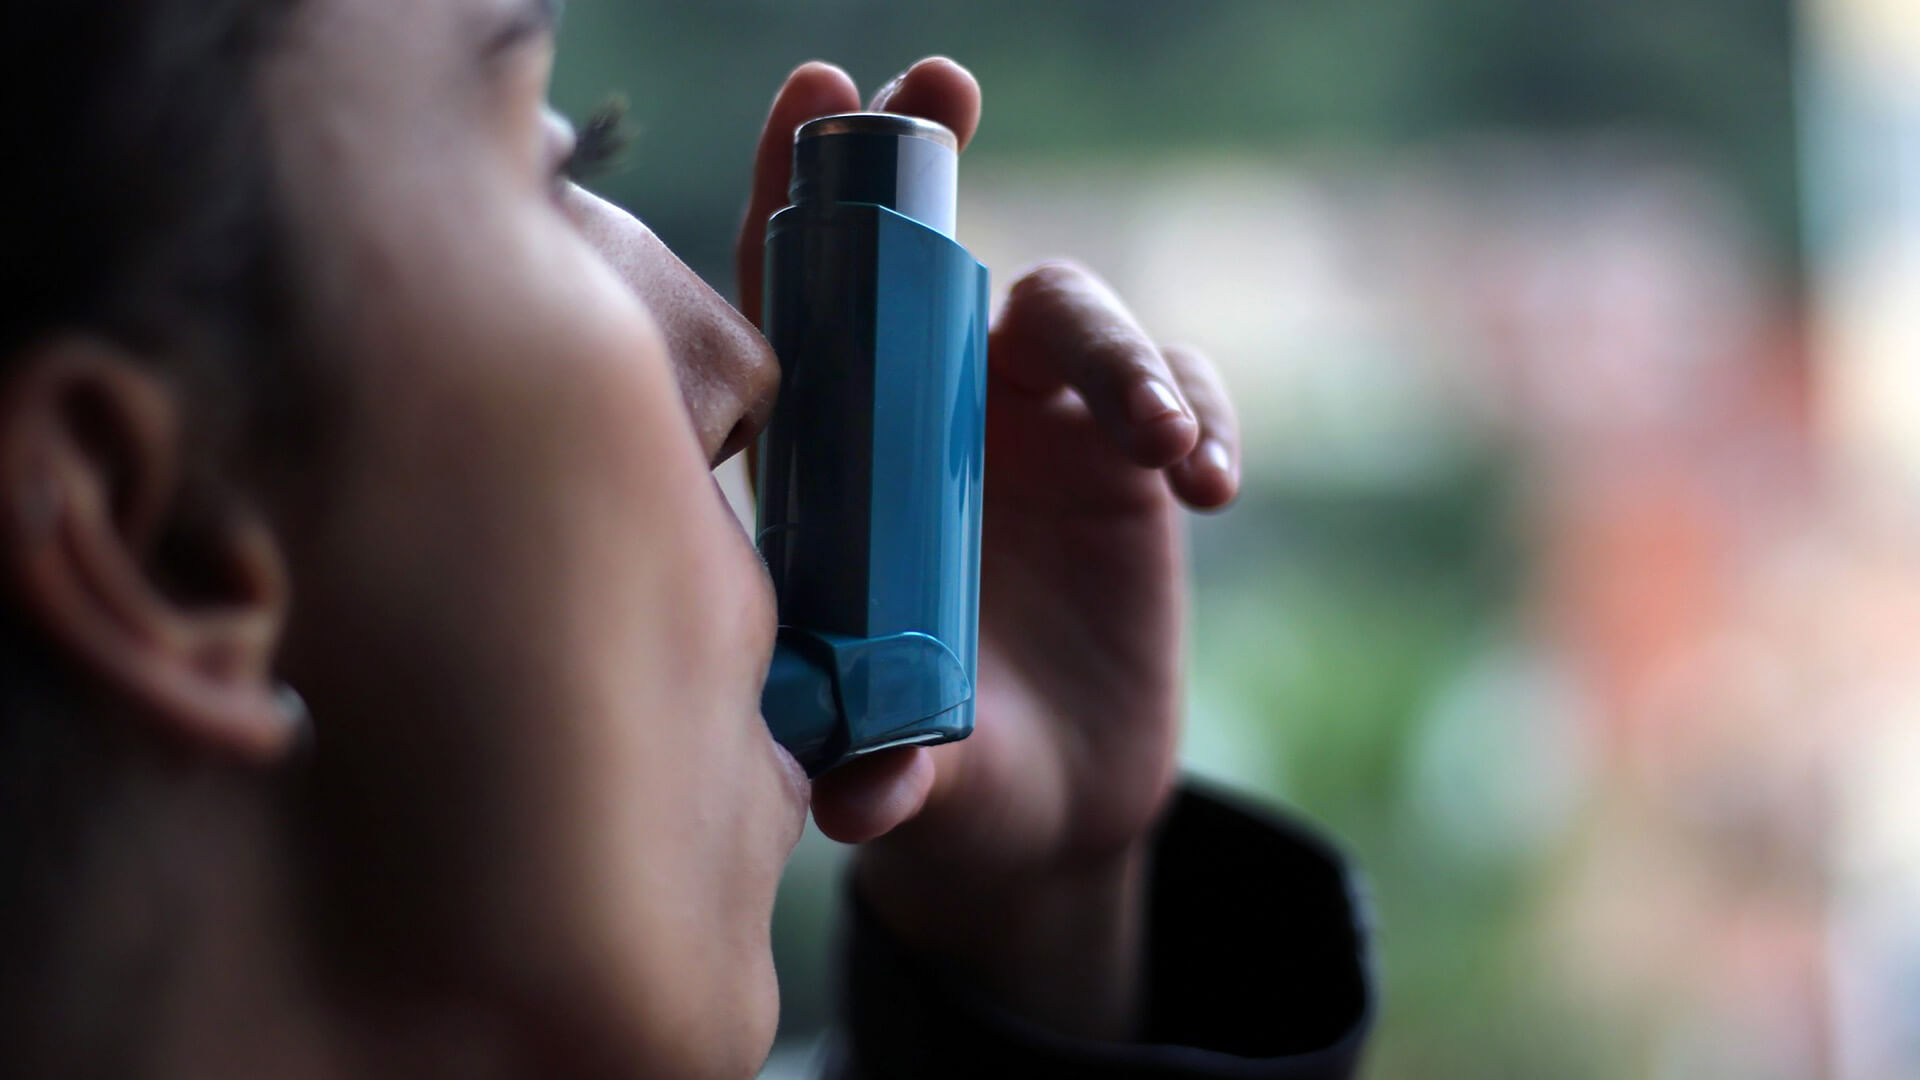 A New Study and Survey by Economist Impact, with the Support of GSK, Shows the Continuing Work that Needs to be Done to Improve Quality of Life for People Living with Asthma.